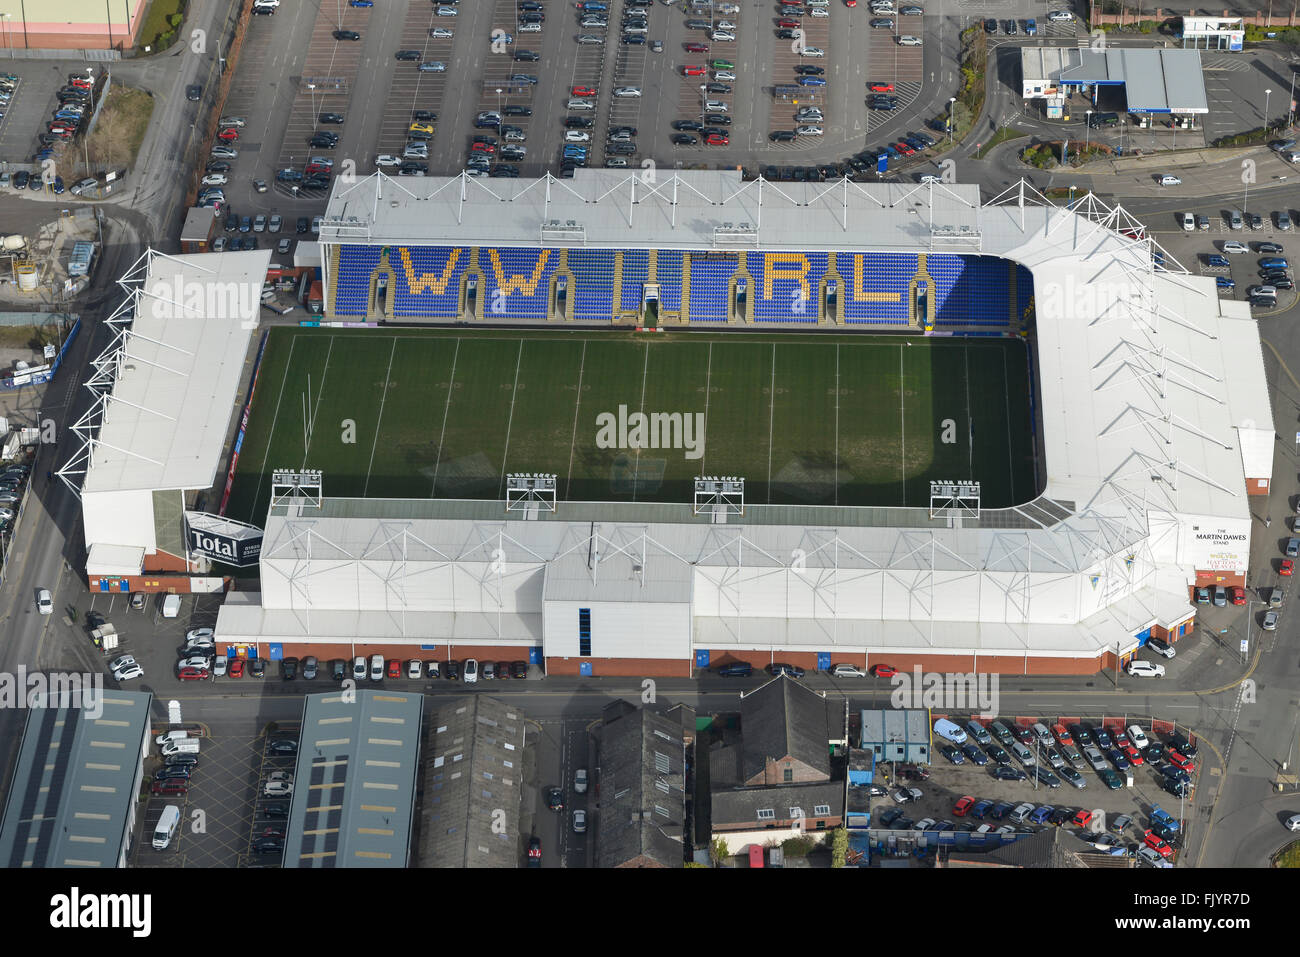 An aerial view of the Halliwell Jones Stadium, home of Warrington Wolves Rugby League FC Stock Photo